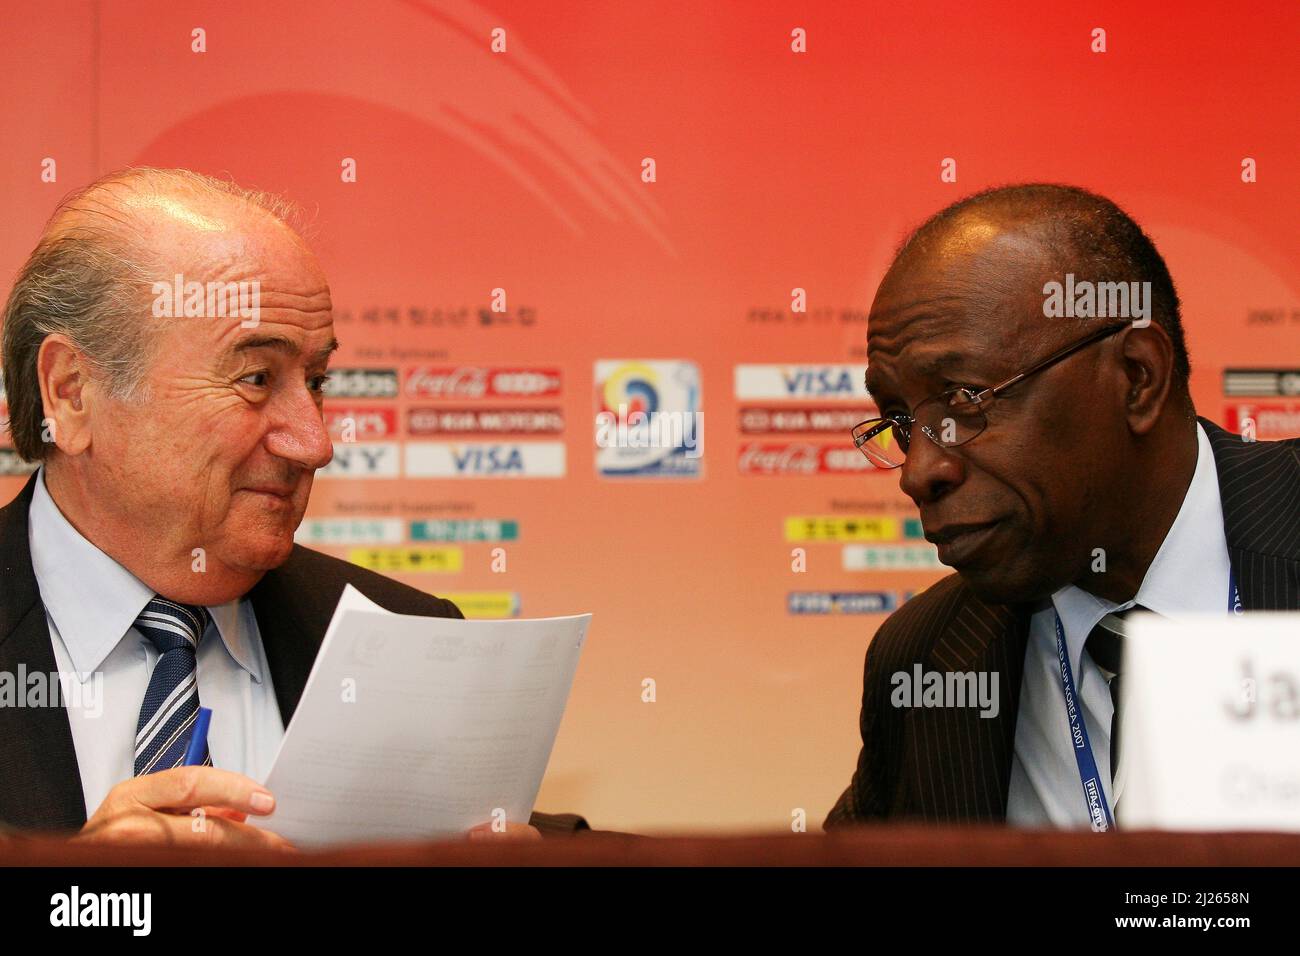 Sep 8, 2007-Seoul, South Korea-Soccer executive Jack Warner, president of CONCACAF and vice-president of FIFA, attends a news conference at a hotel in Seoul, in this file picture taken September 8, 2007. FIFA is to open an investigation into a possible breach of its ethics code by presidential candidate Mohamed Bin Hammam and executive committee member Jack Warner, Reuters reported on May 25, 2011. Stock Photo